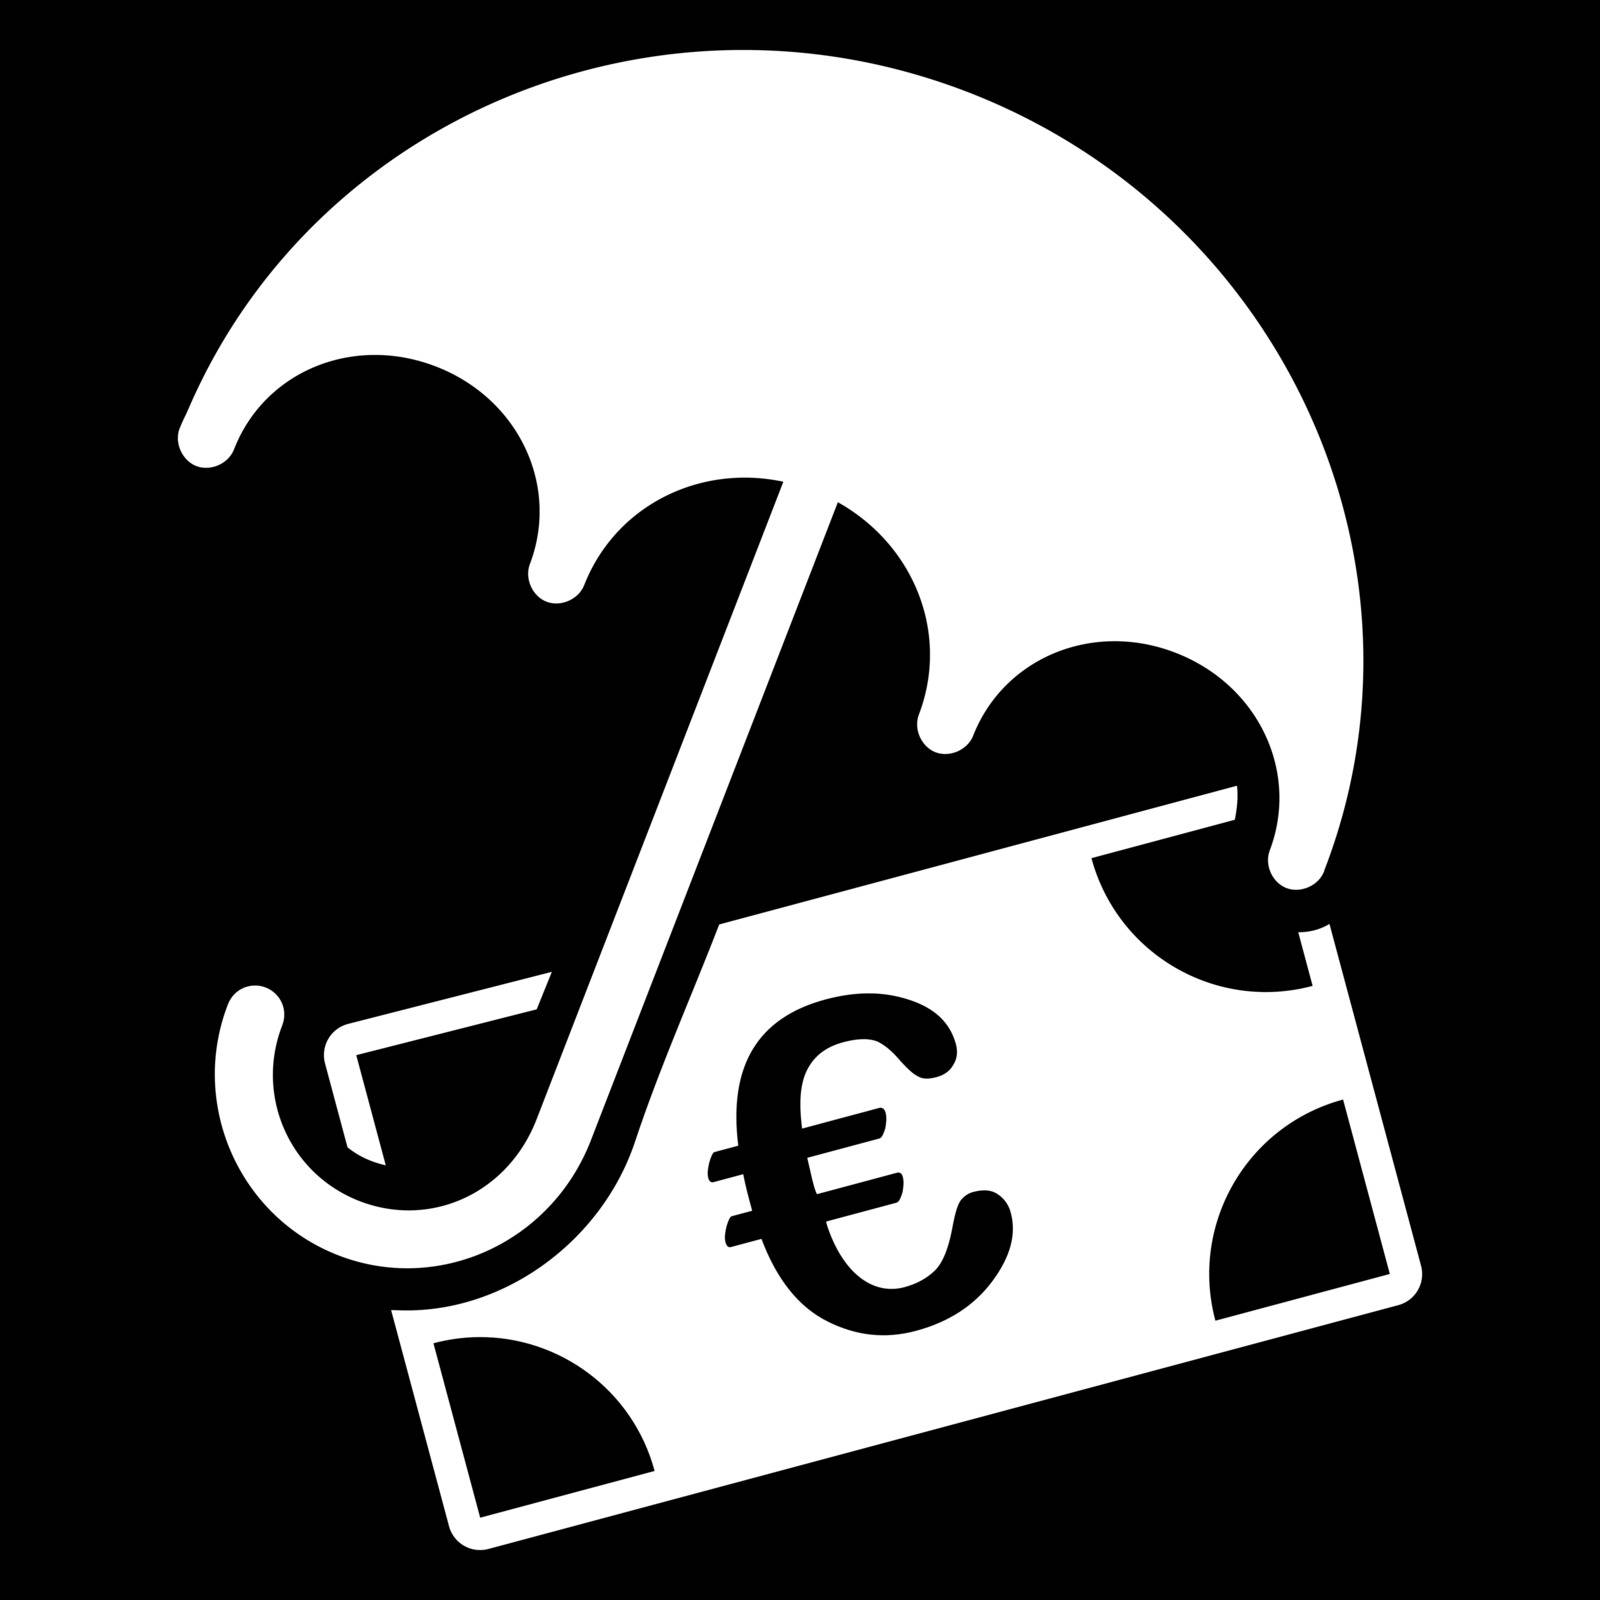 Financial insurance icon by ahasoft